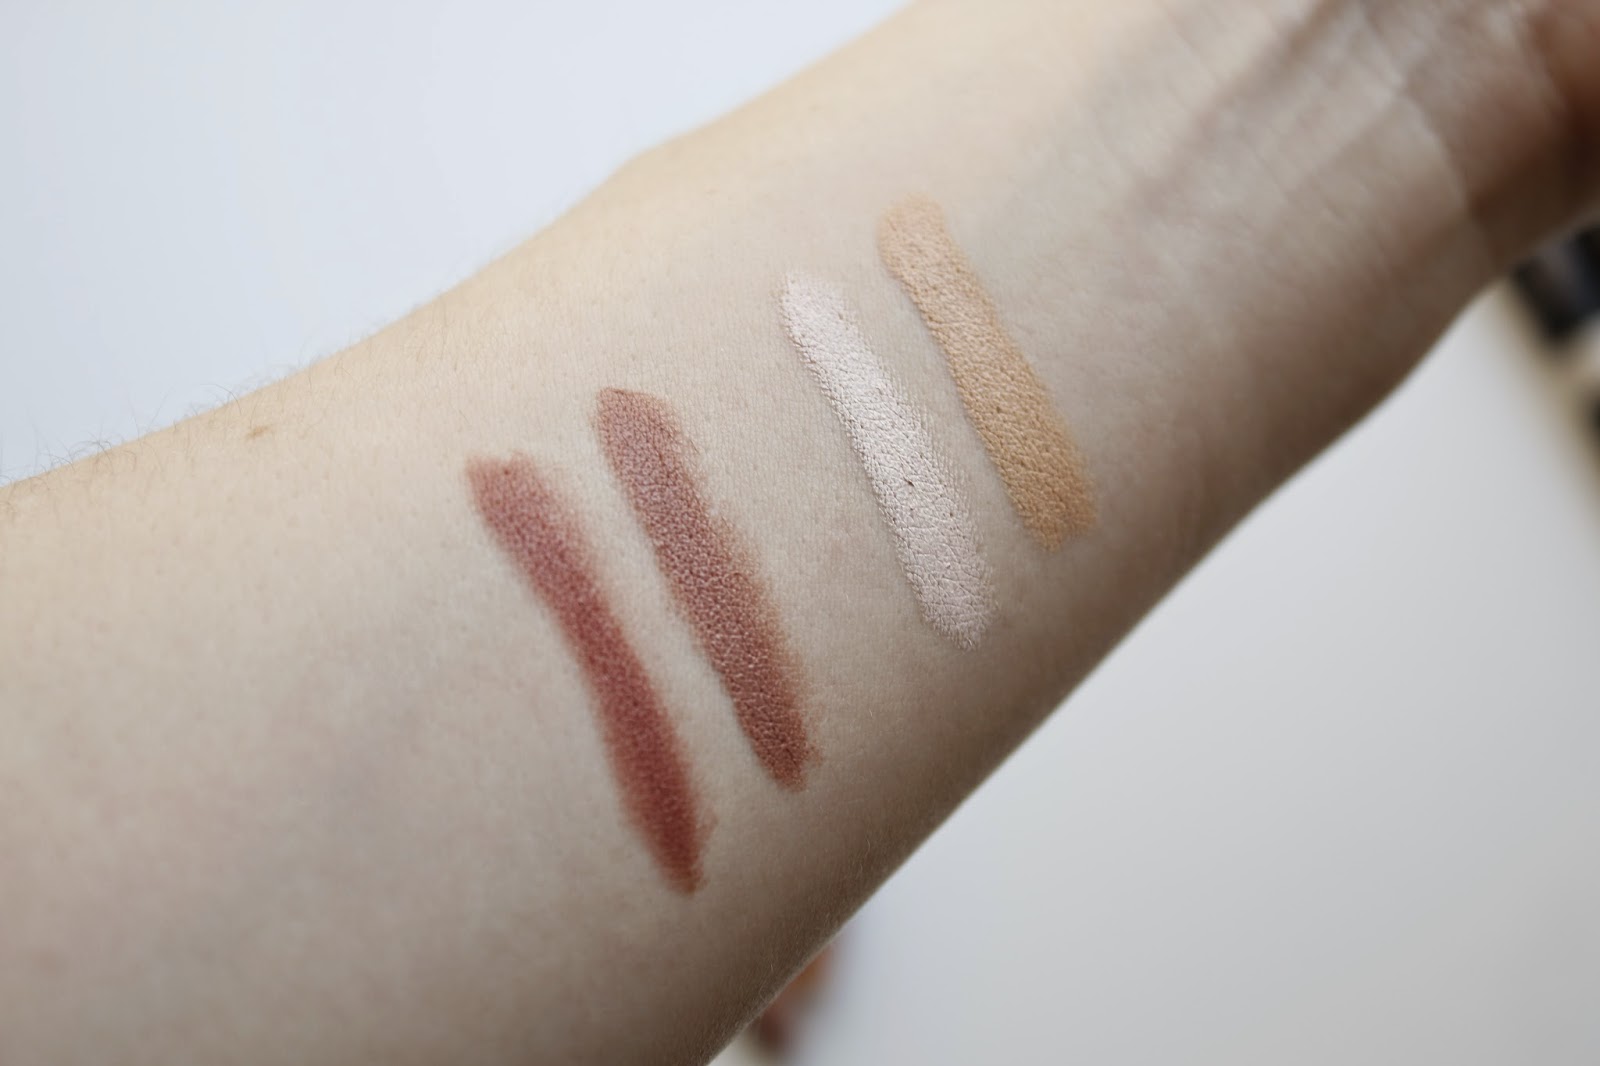 New launches from Nudestix